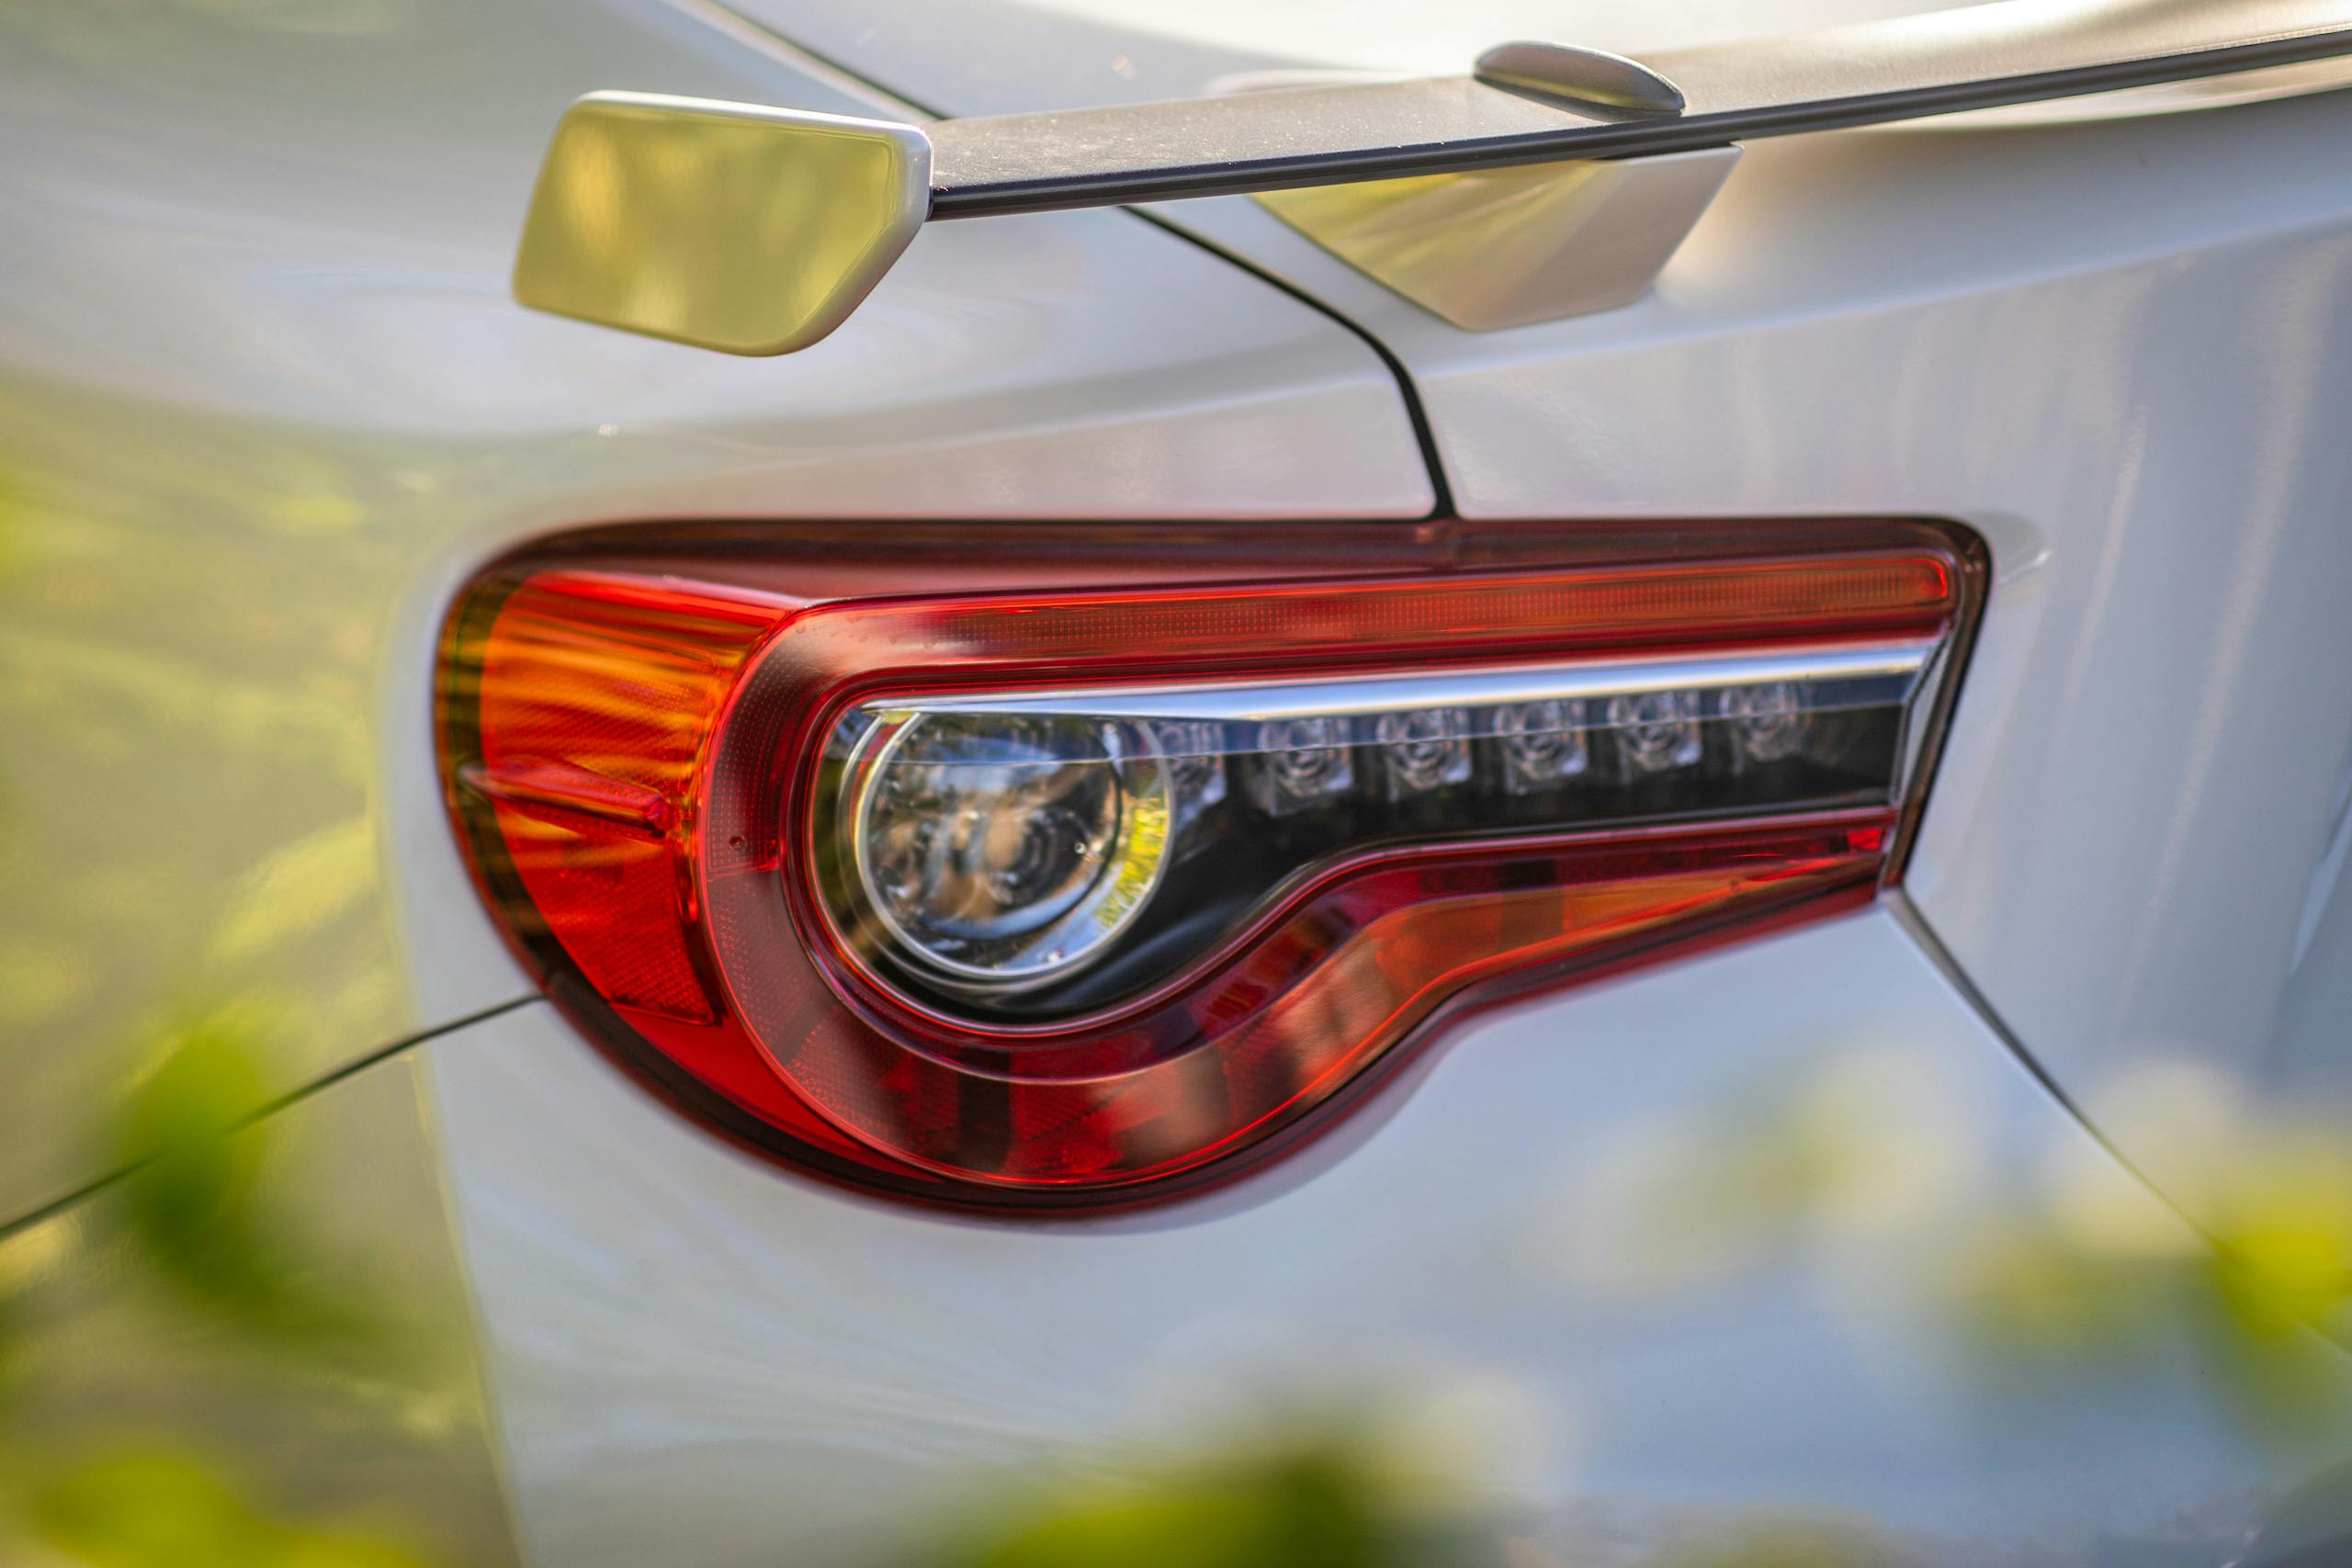 2020 Toyota 86 GT rear wing taillight detail